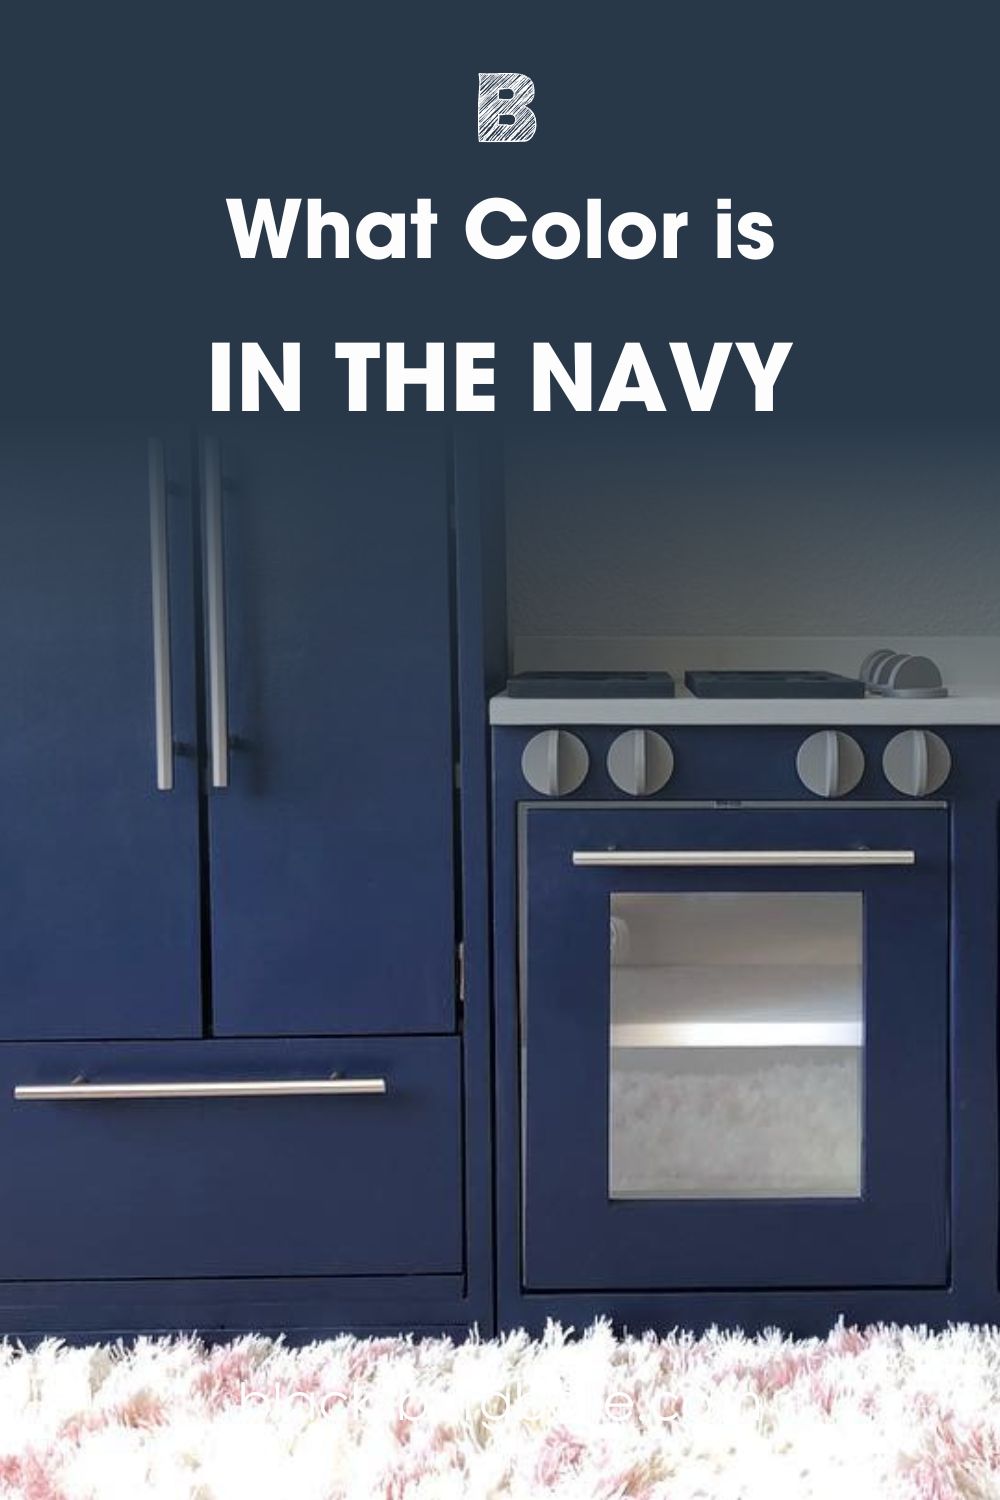 The Visual Distinctions IN THE NAVY